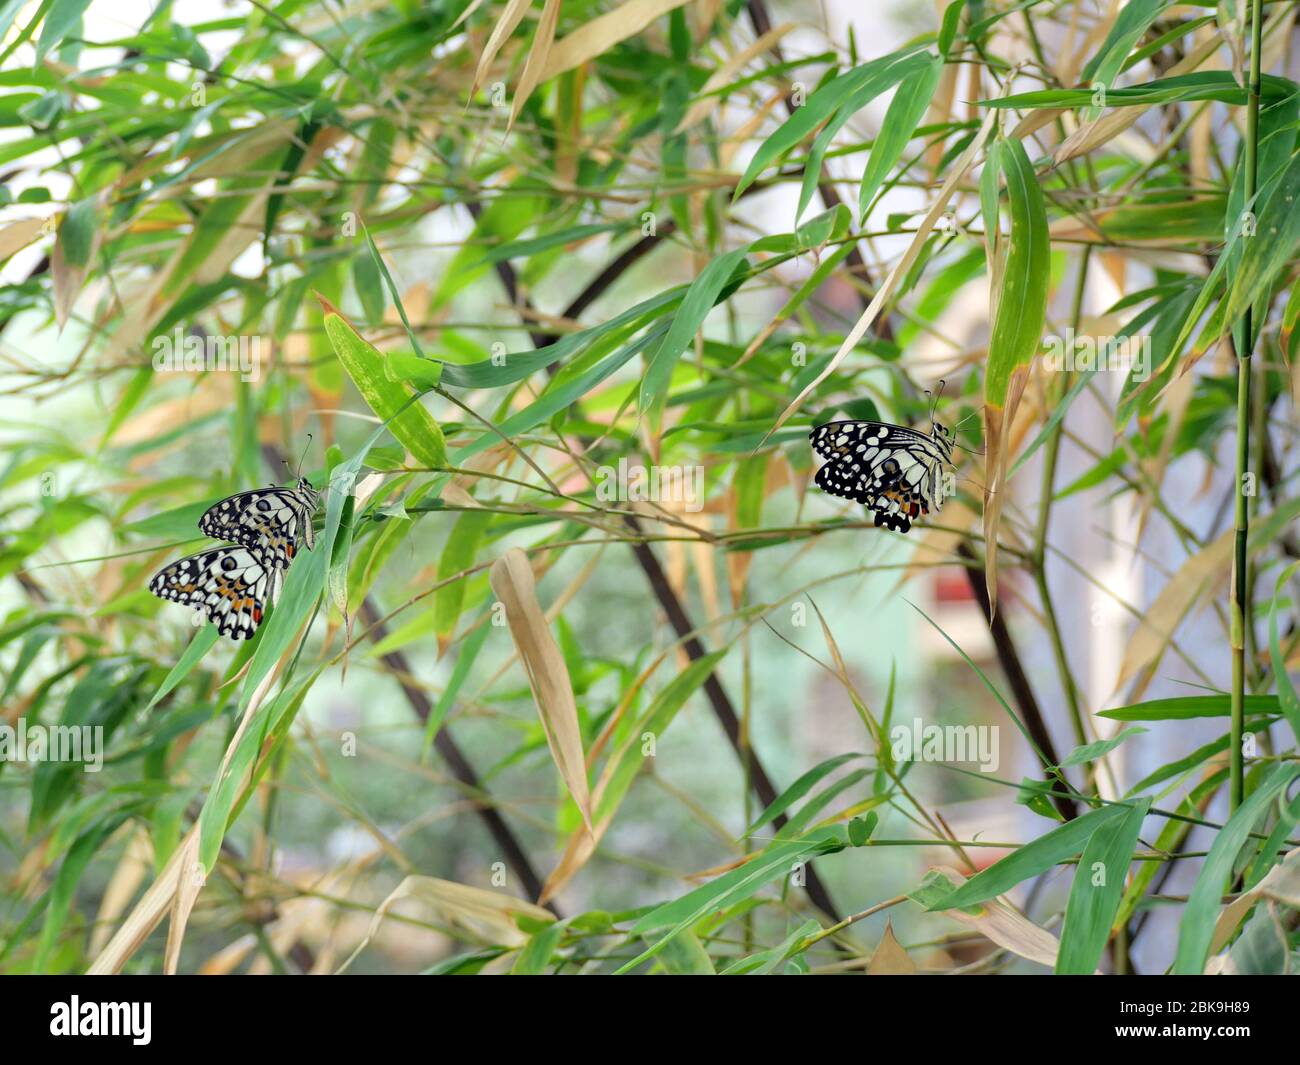 Three beautiful lime butterflies, lemon butterfly, or chequered swallowtail (Papilio demoleus) on bamboo tree by the fence Stock Photo